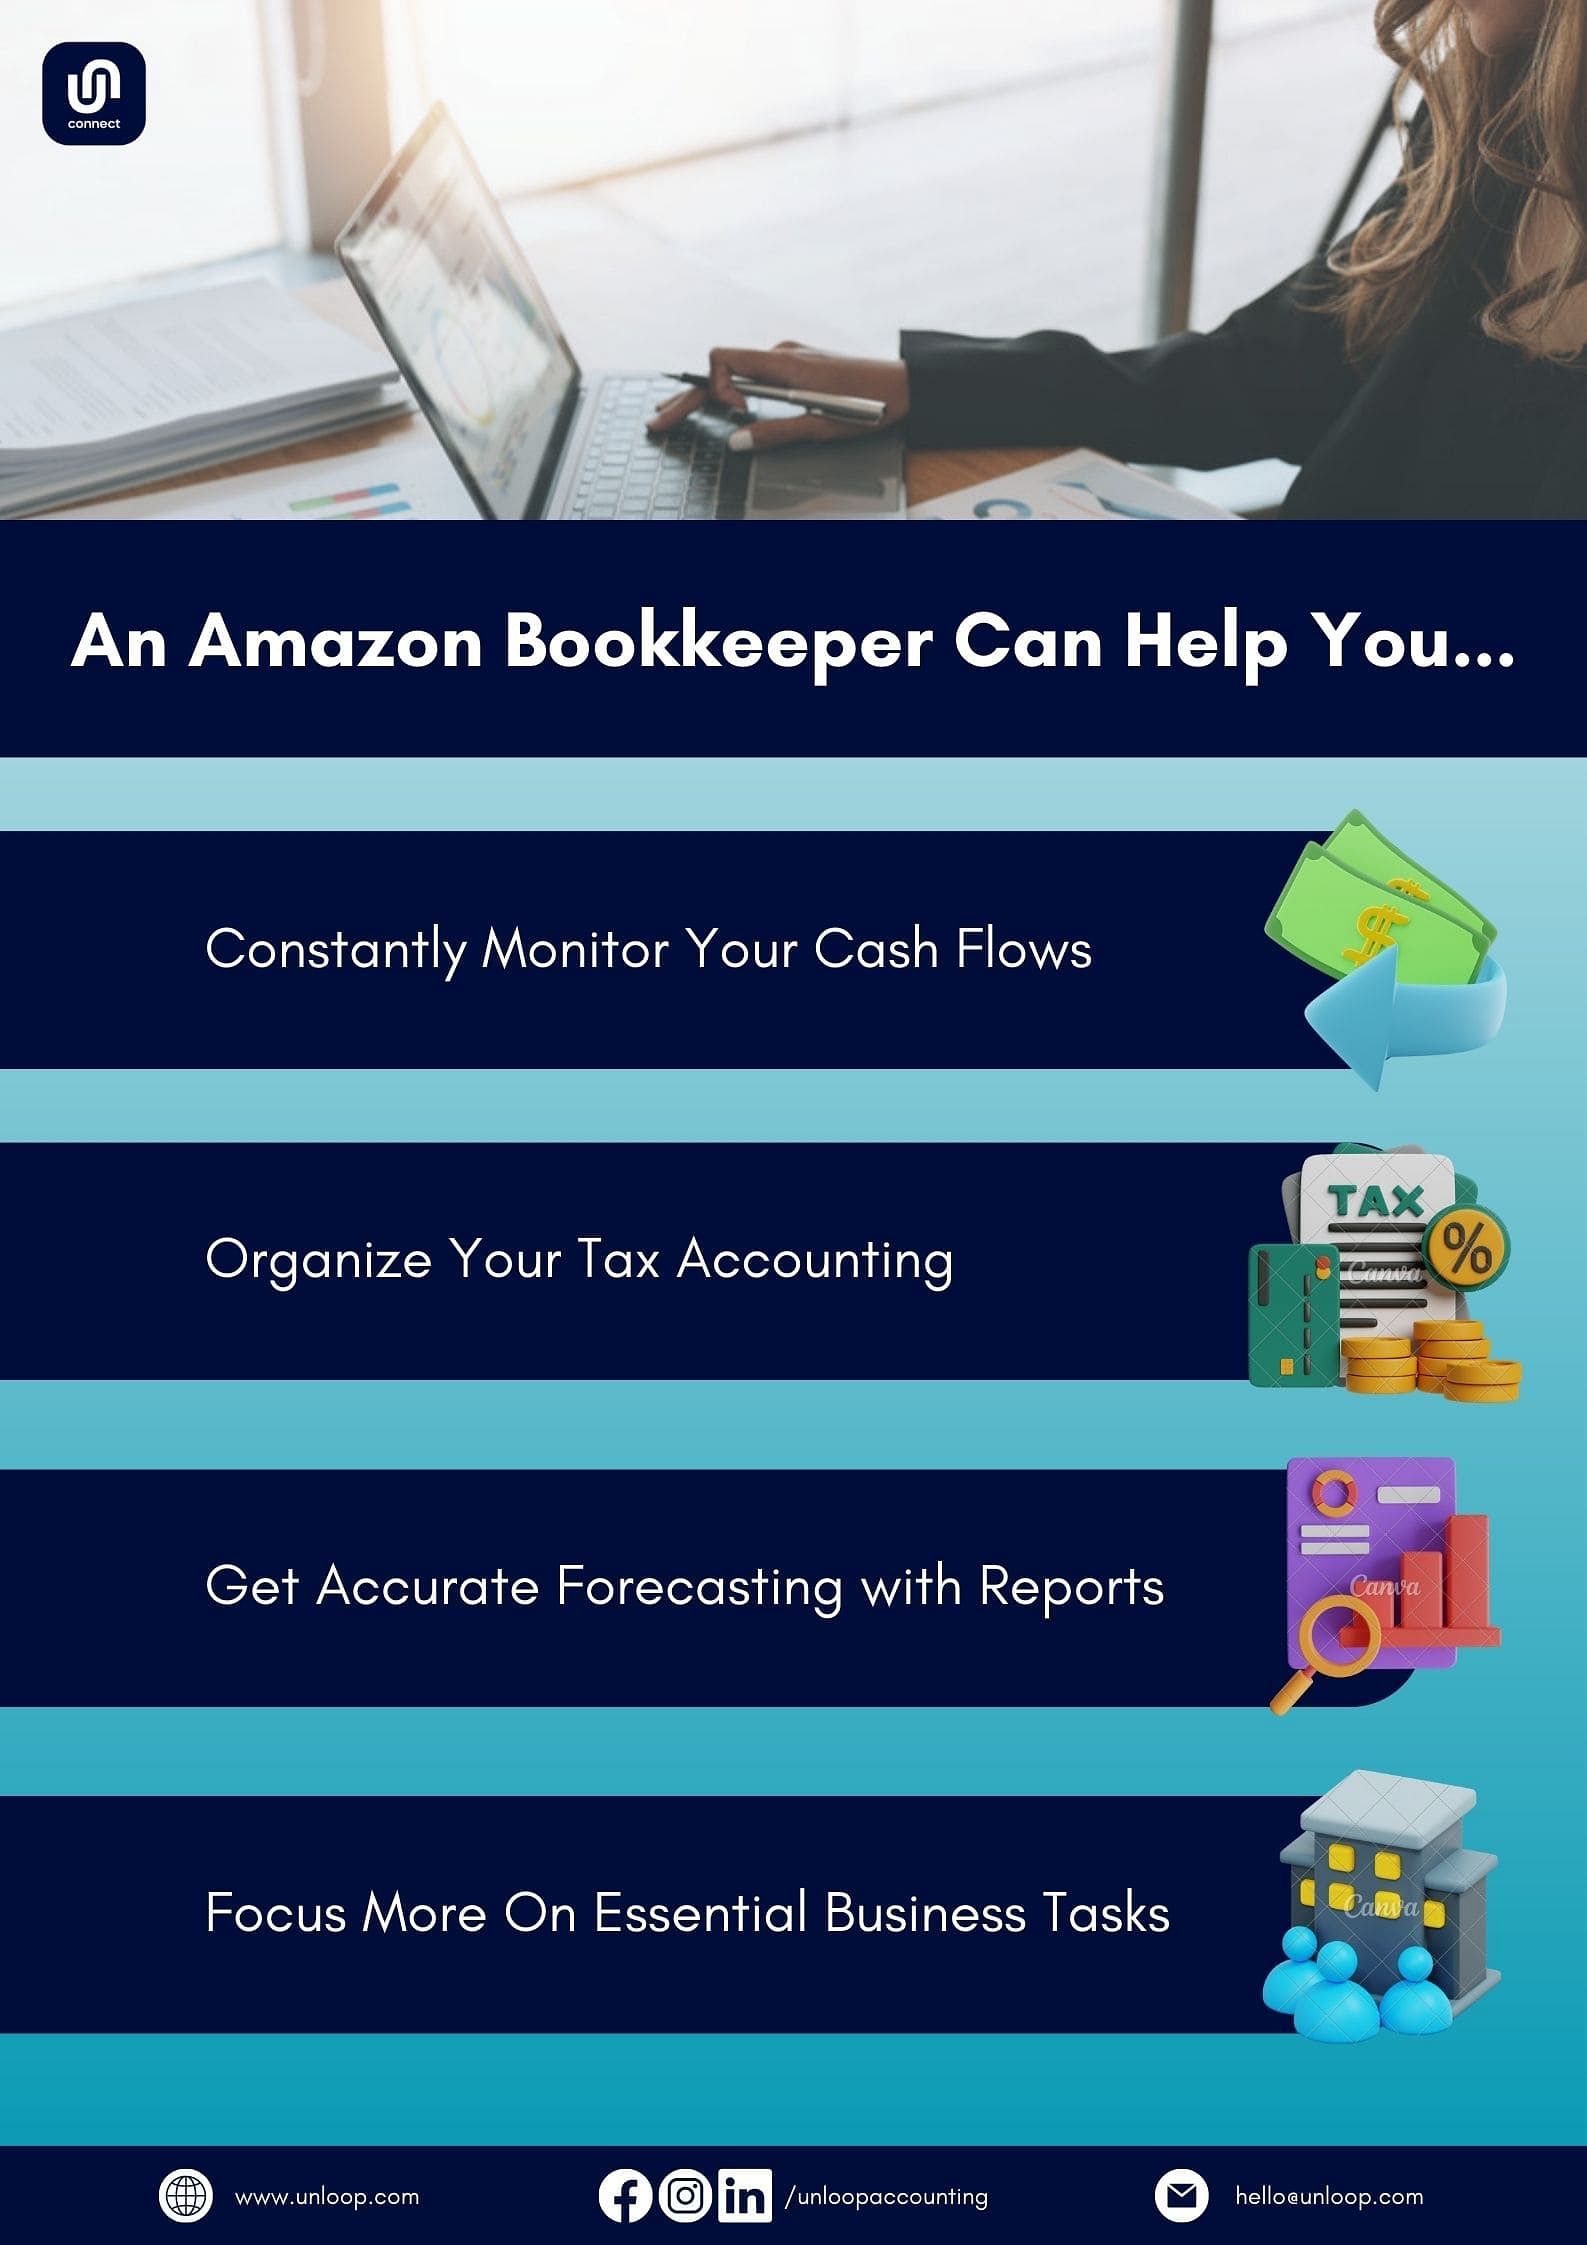 graphic showing the benefits of hiring an Amazon bookkeeper